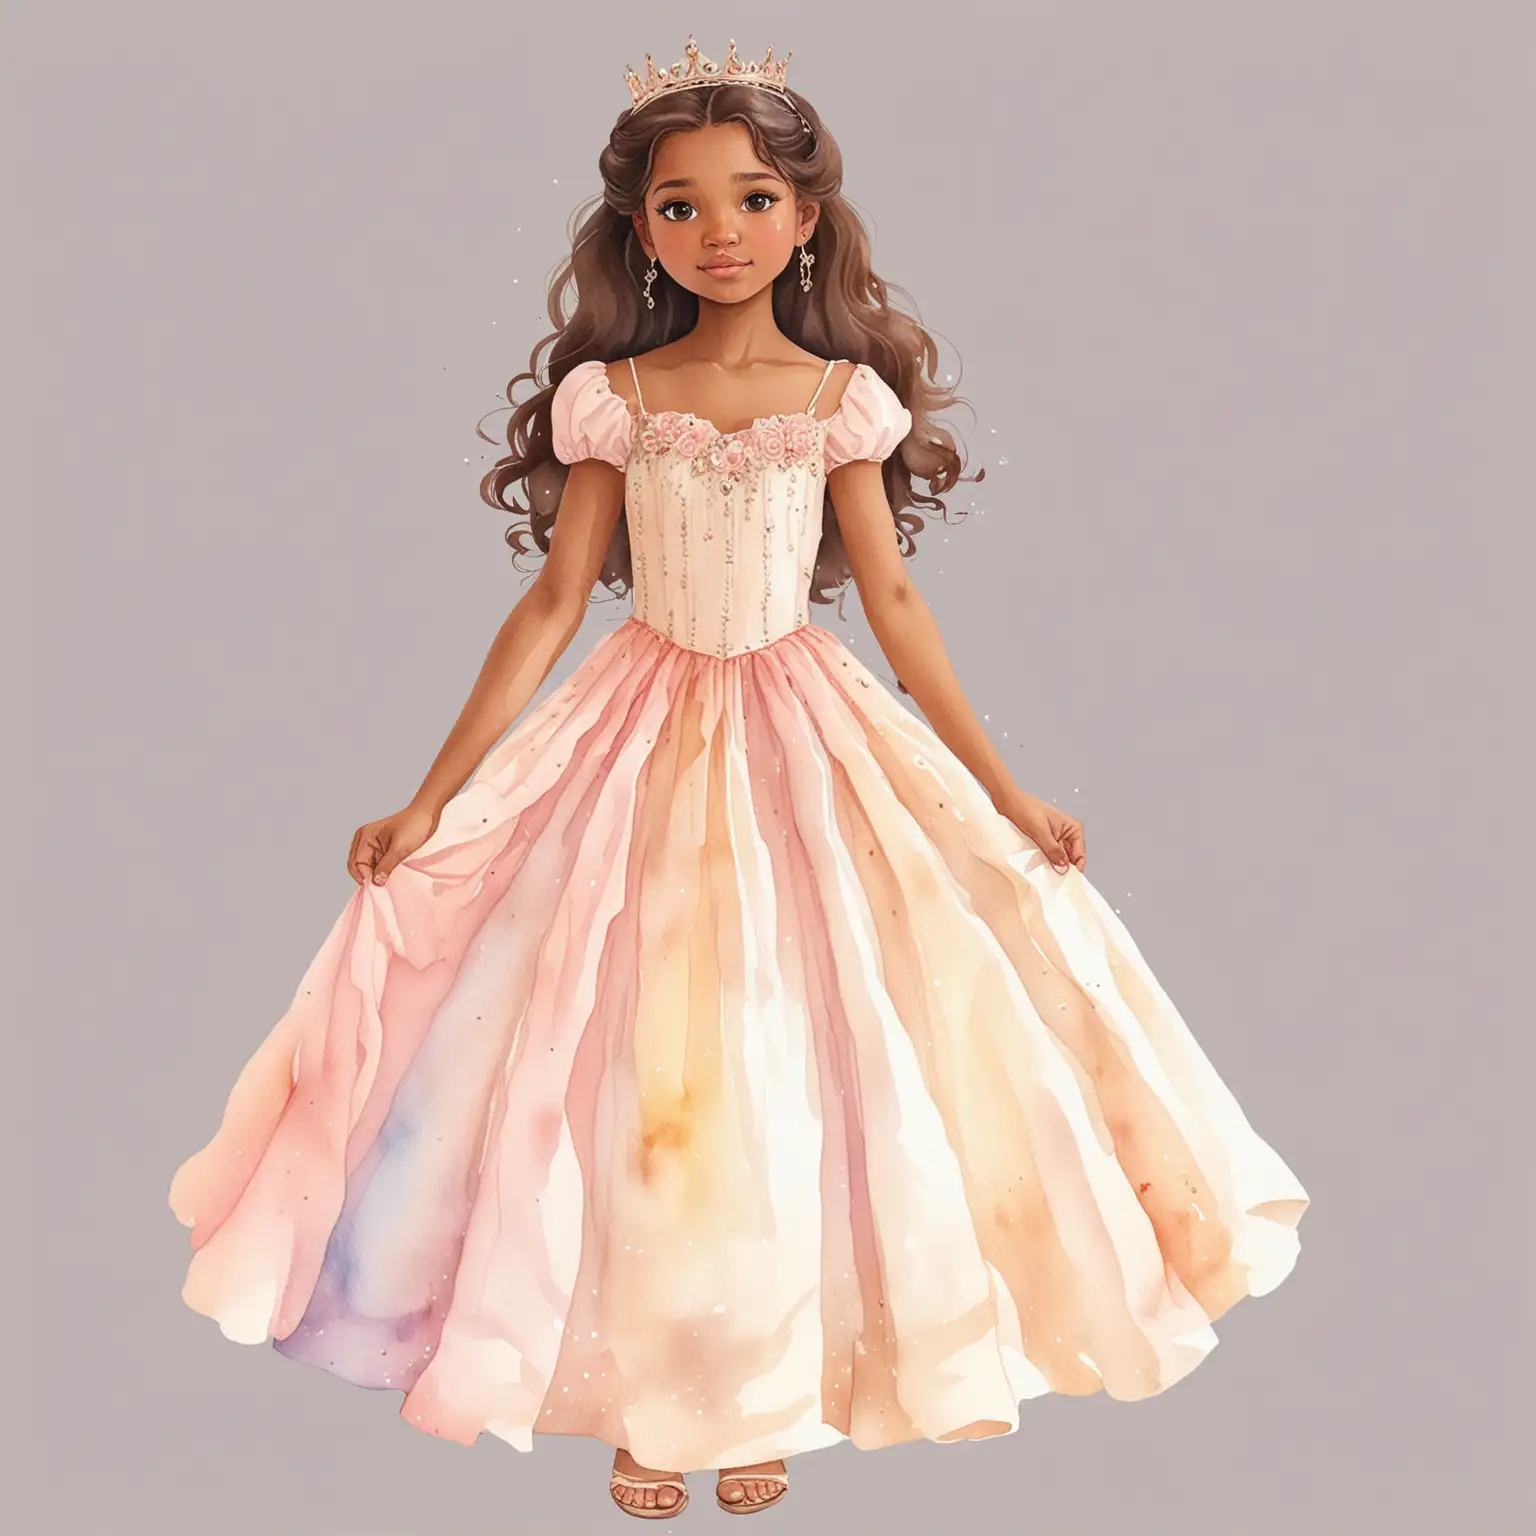 watercolor full body brown skinned princess with pastel princess dress on a white background